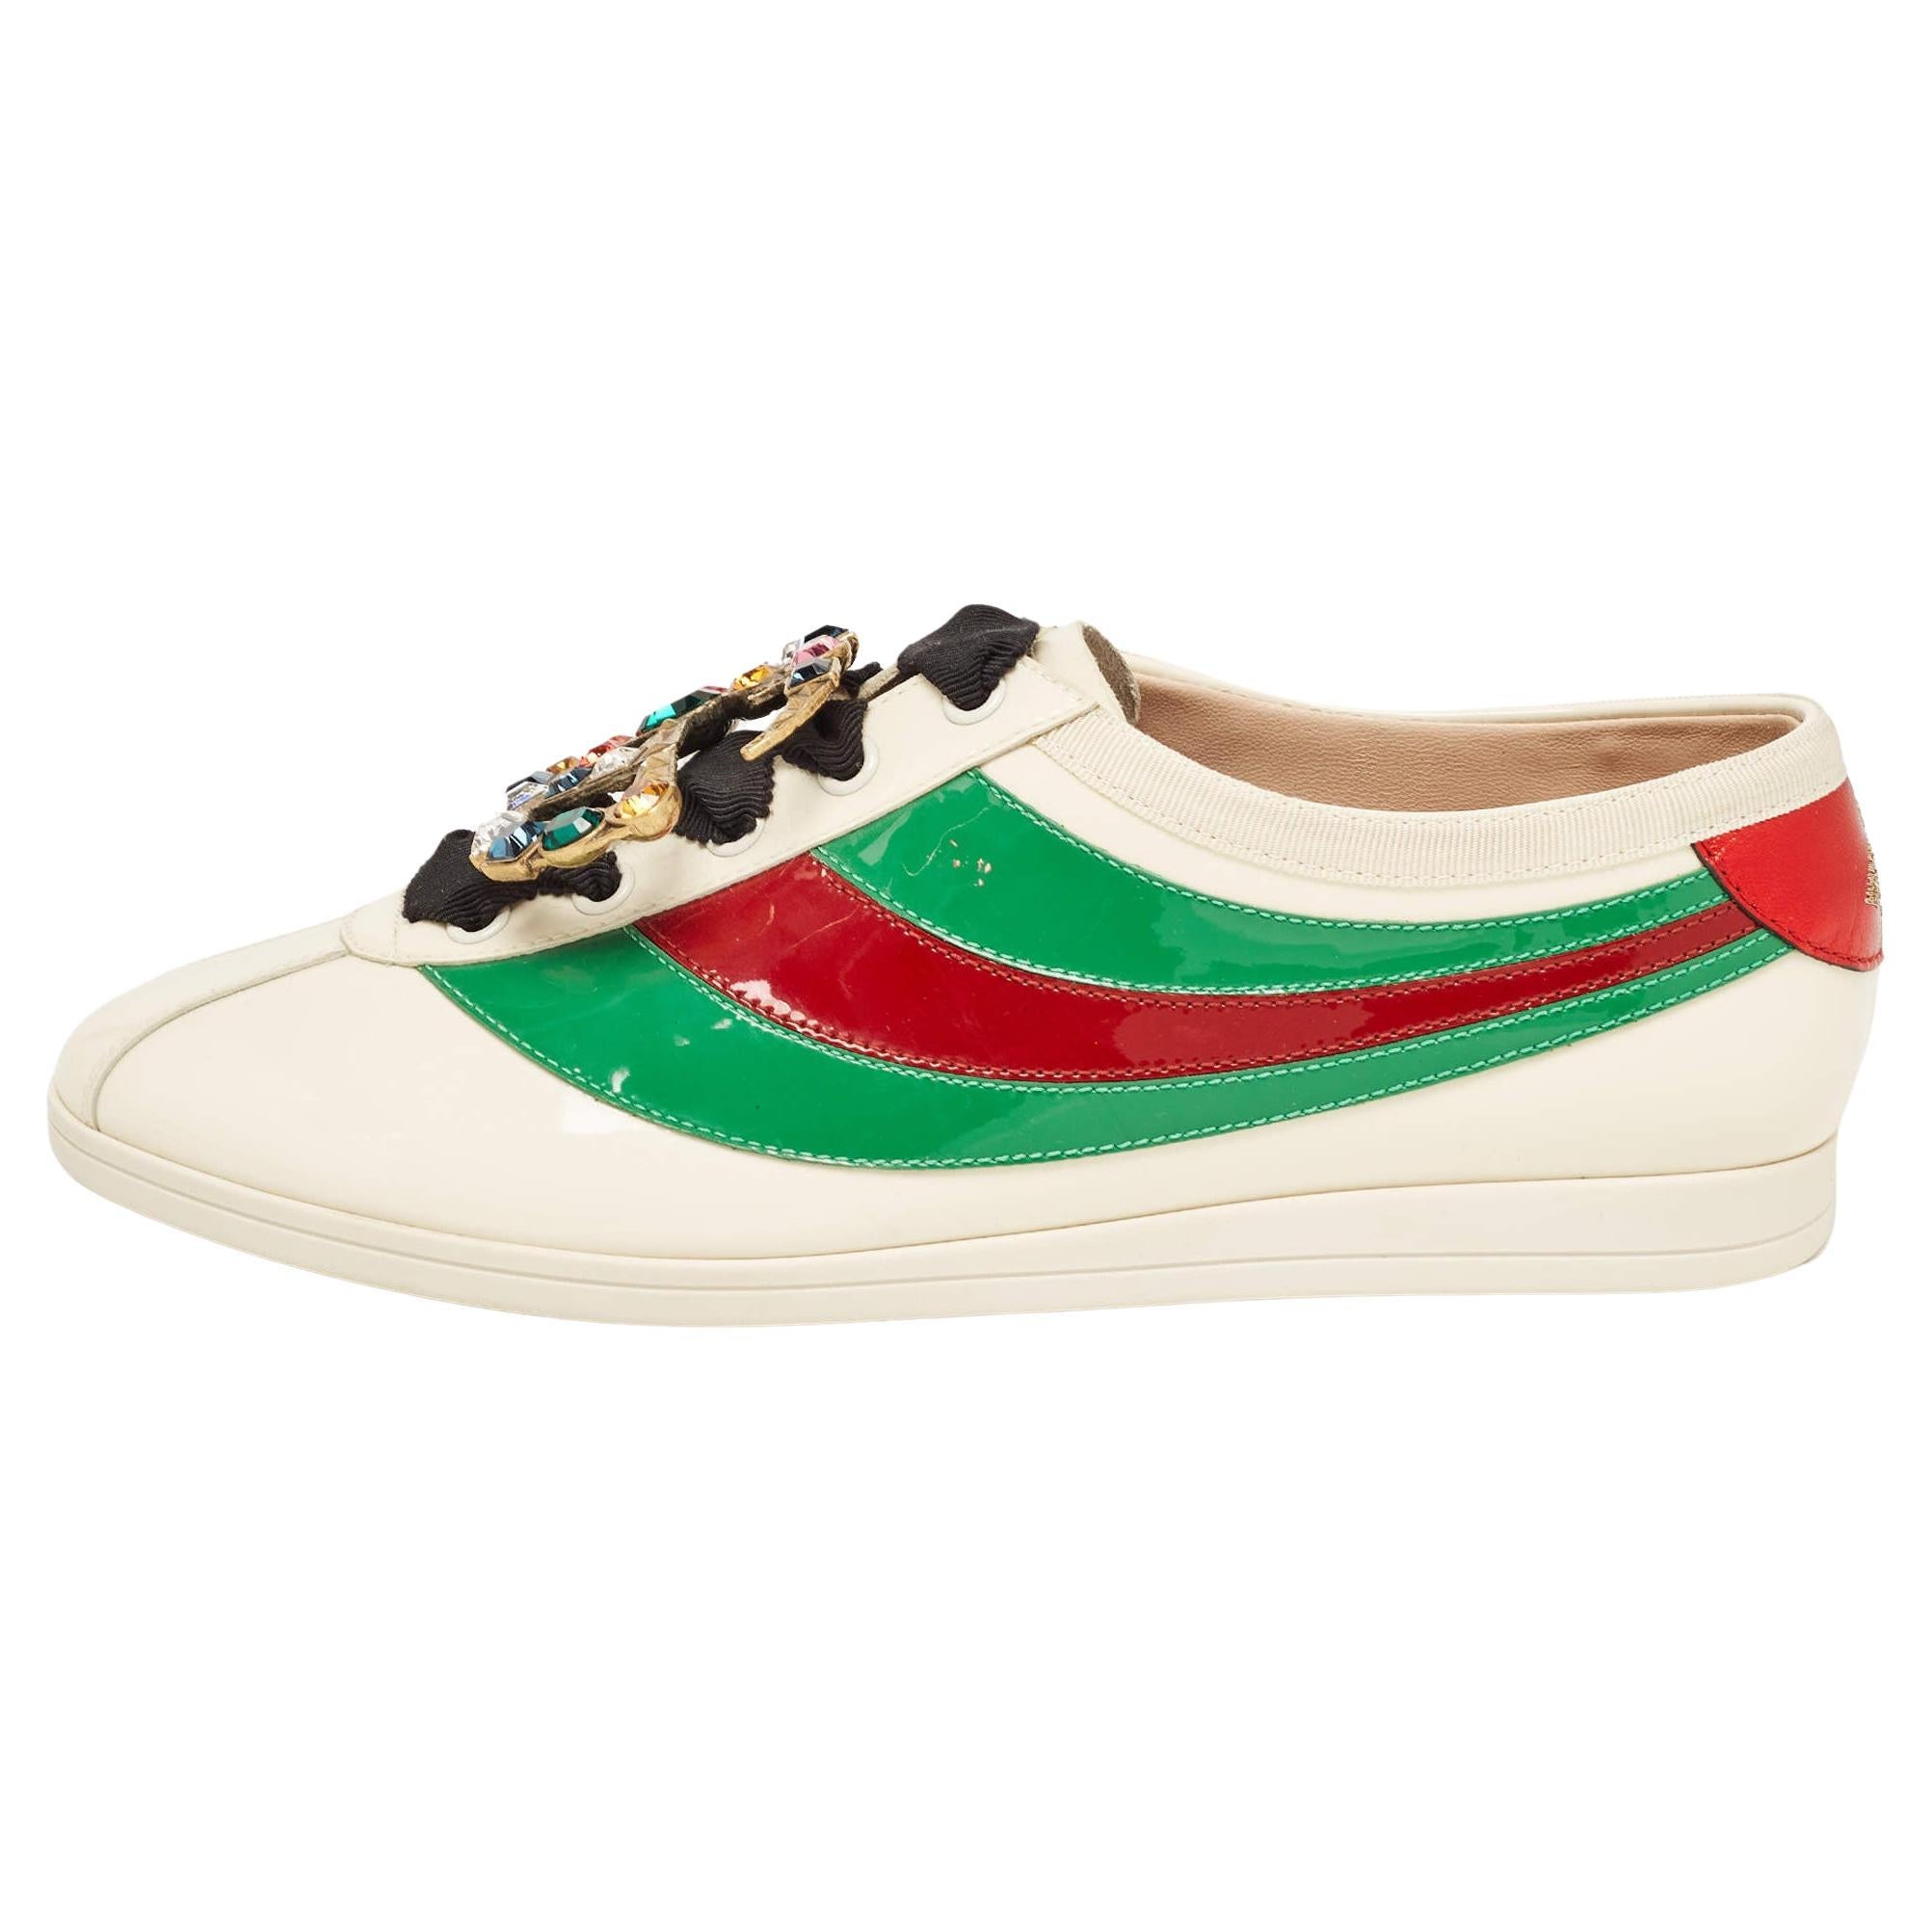 Gucci Tricolor Patent Falacer Crystal Embellished Low Top Sneakers Size 38 For Sale